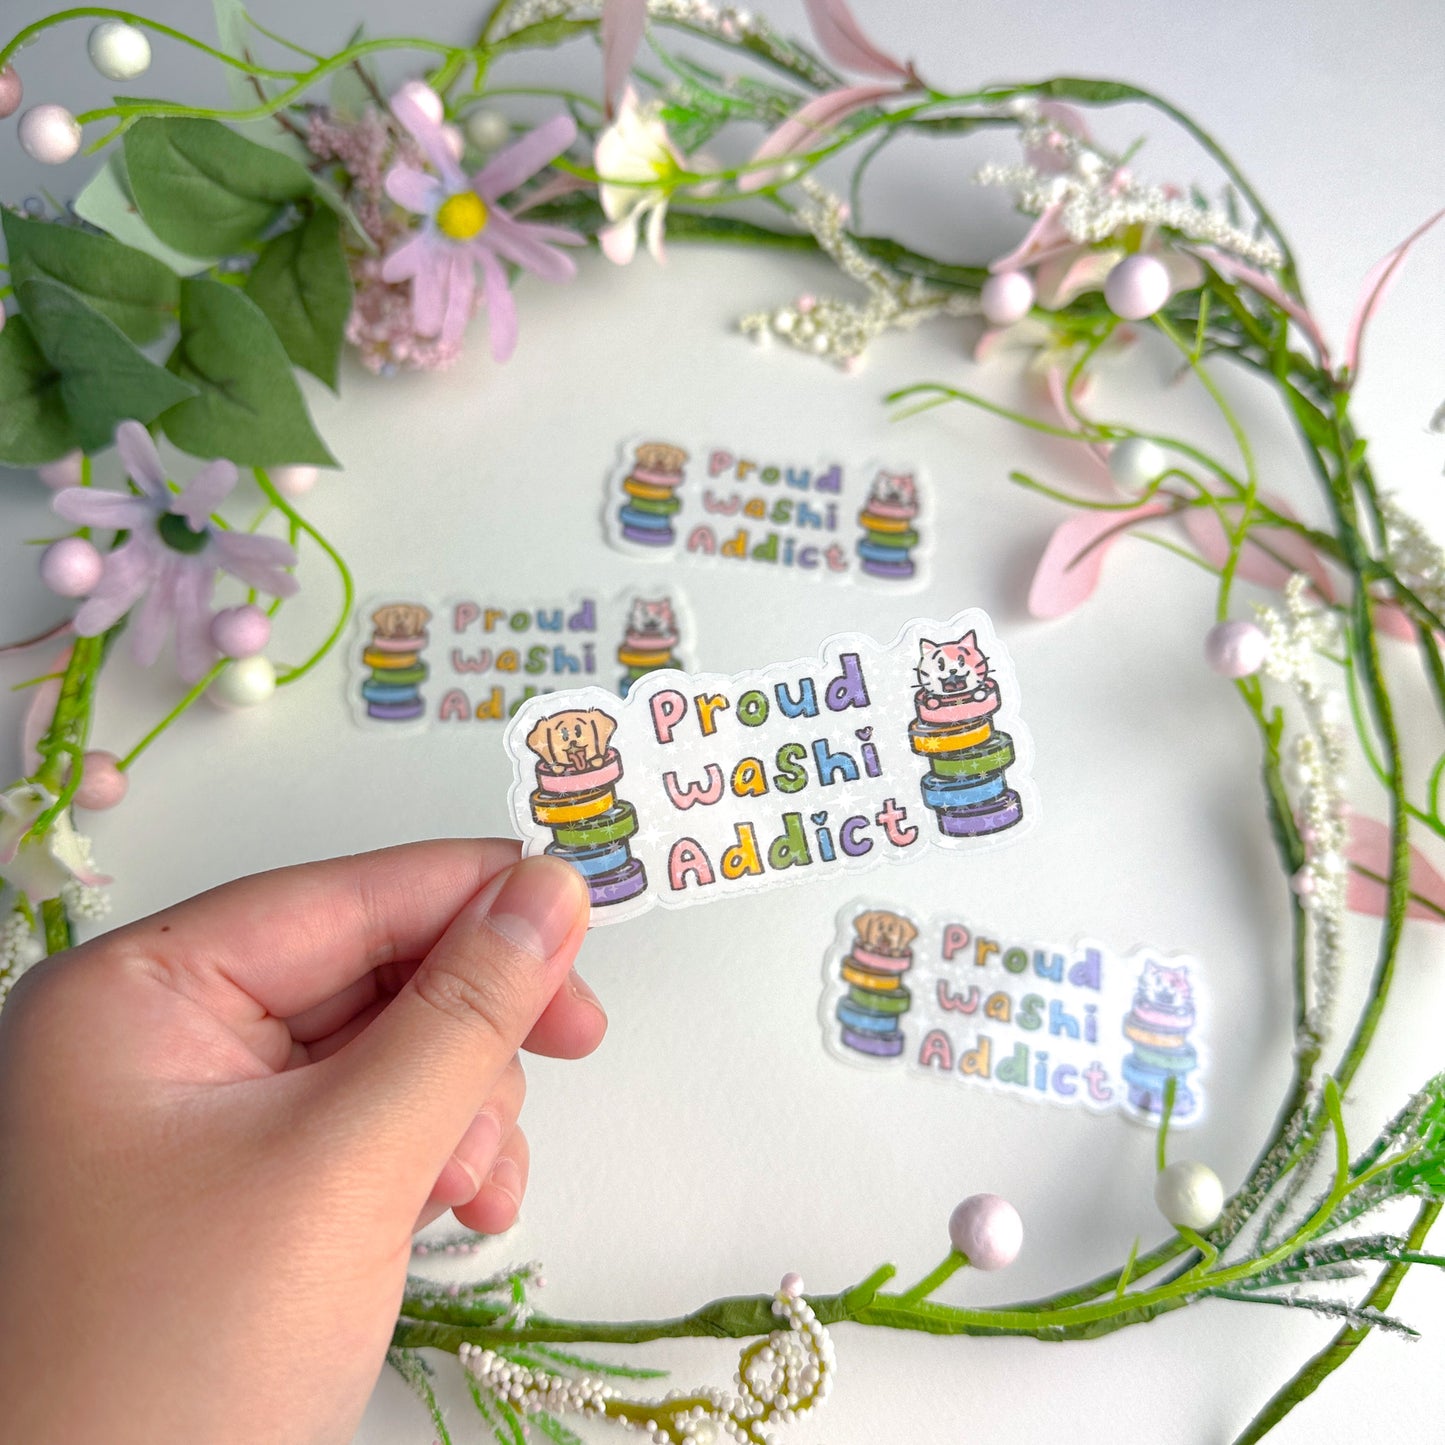 Proud Washi Addict - Joey and Cake Holo Die Cut Stickers